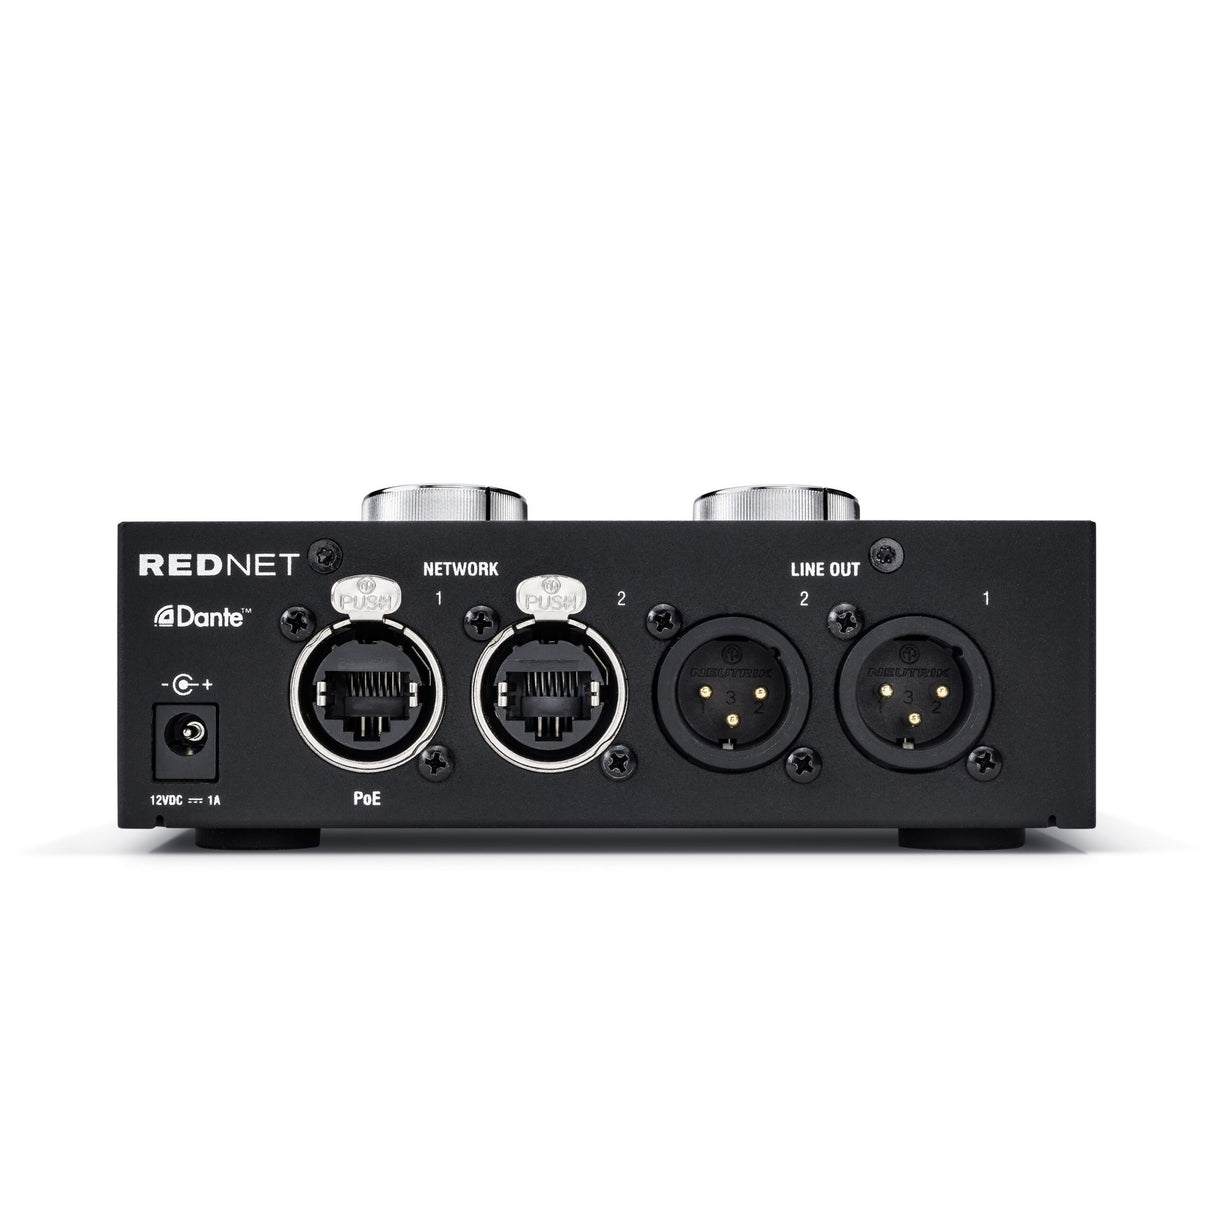 Focusrite RedNet AM2 Stereo Headphone/Line Out Dante Interface with PoE